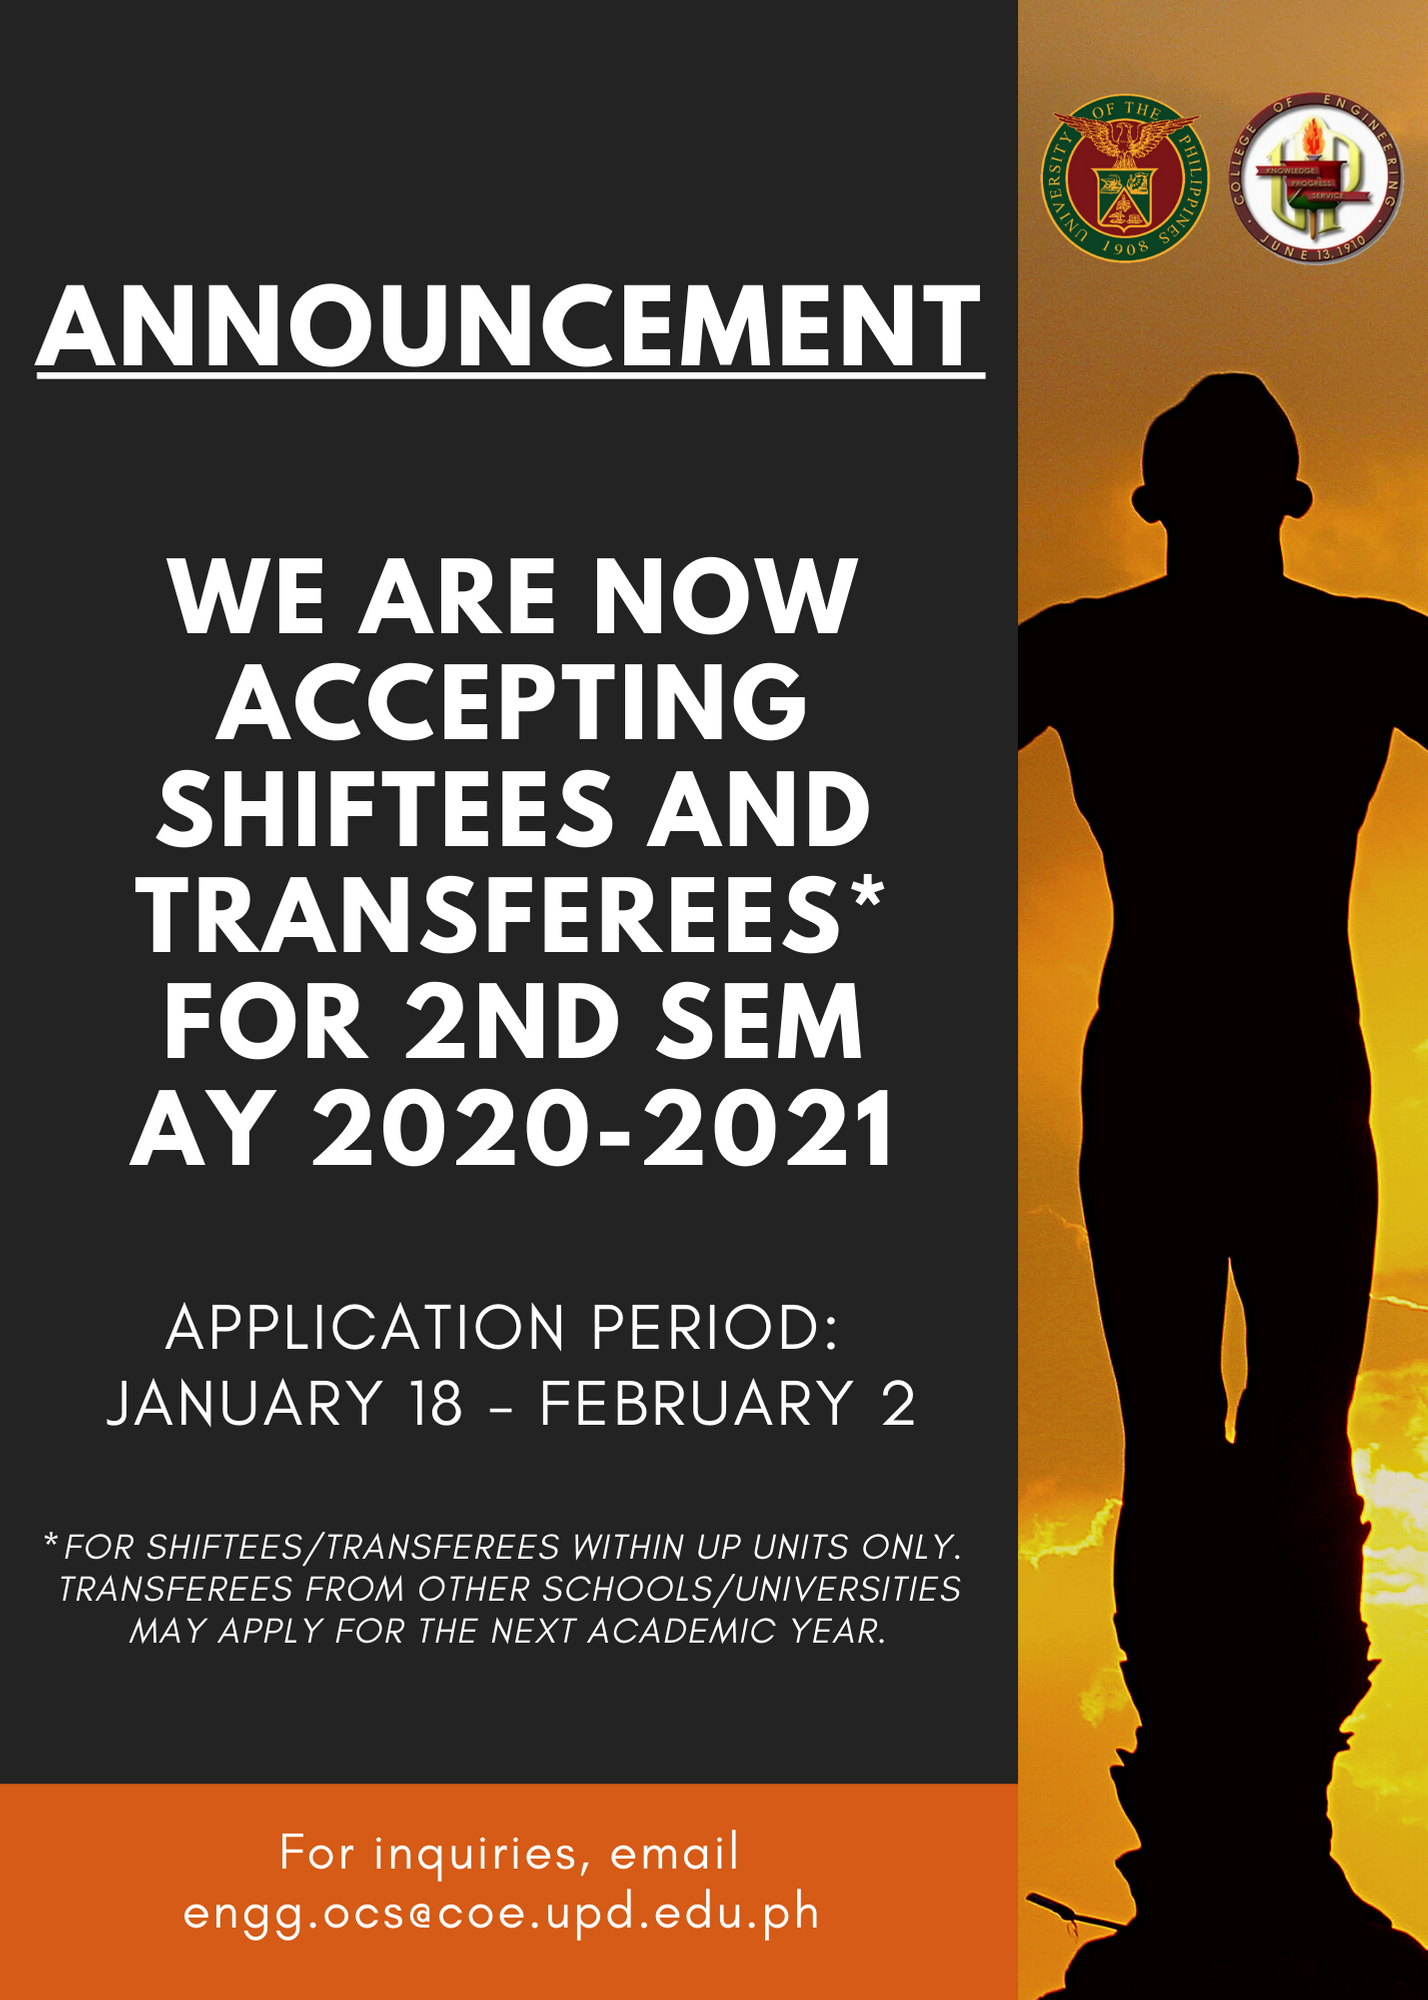 Applications for Shiftees and Transferees for 2nd Sem AY 2020-2021